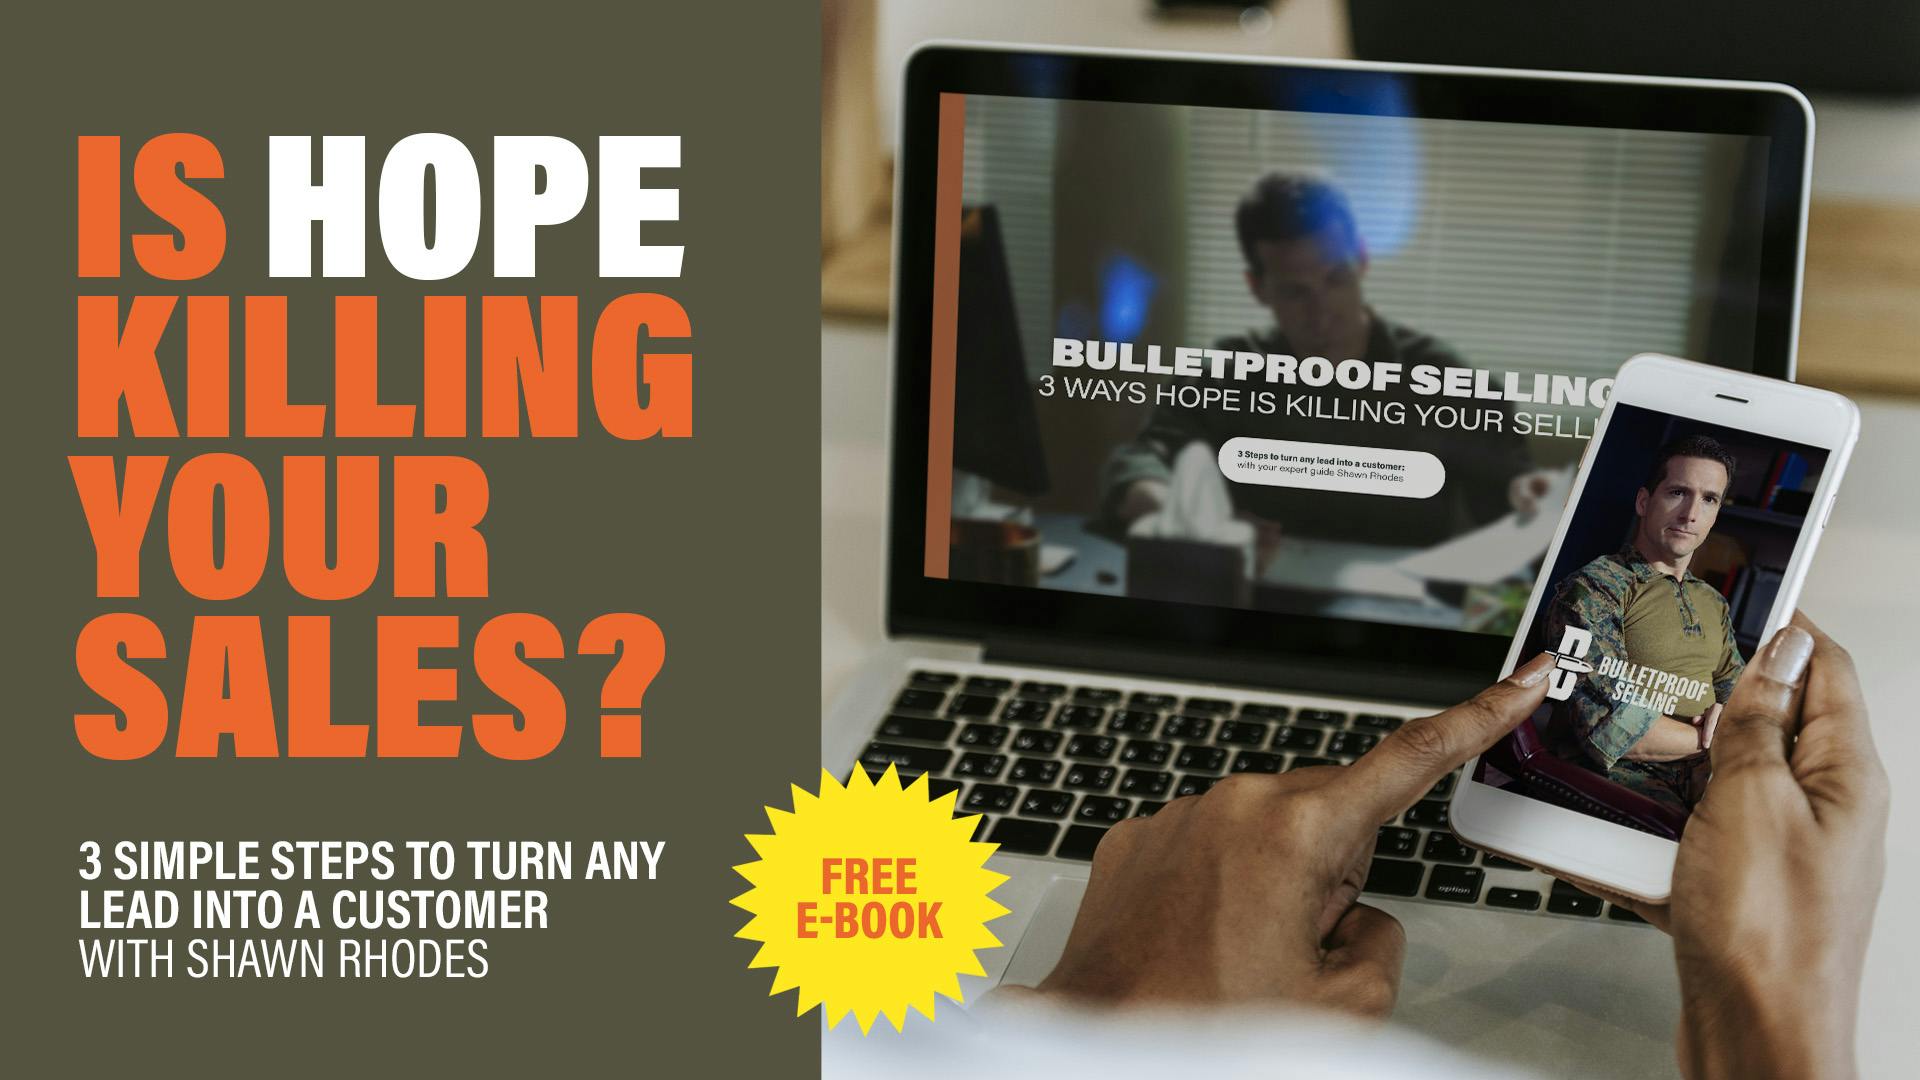 3 Ways Hope Is Killing Your Selling